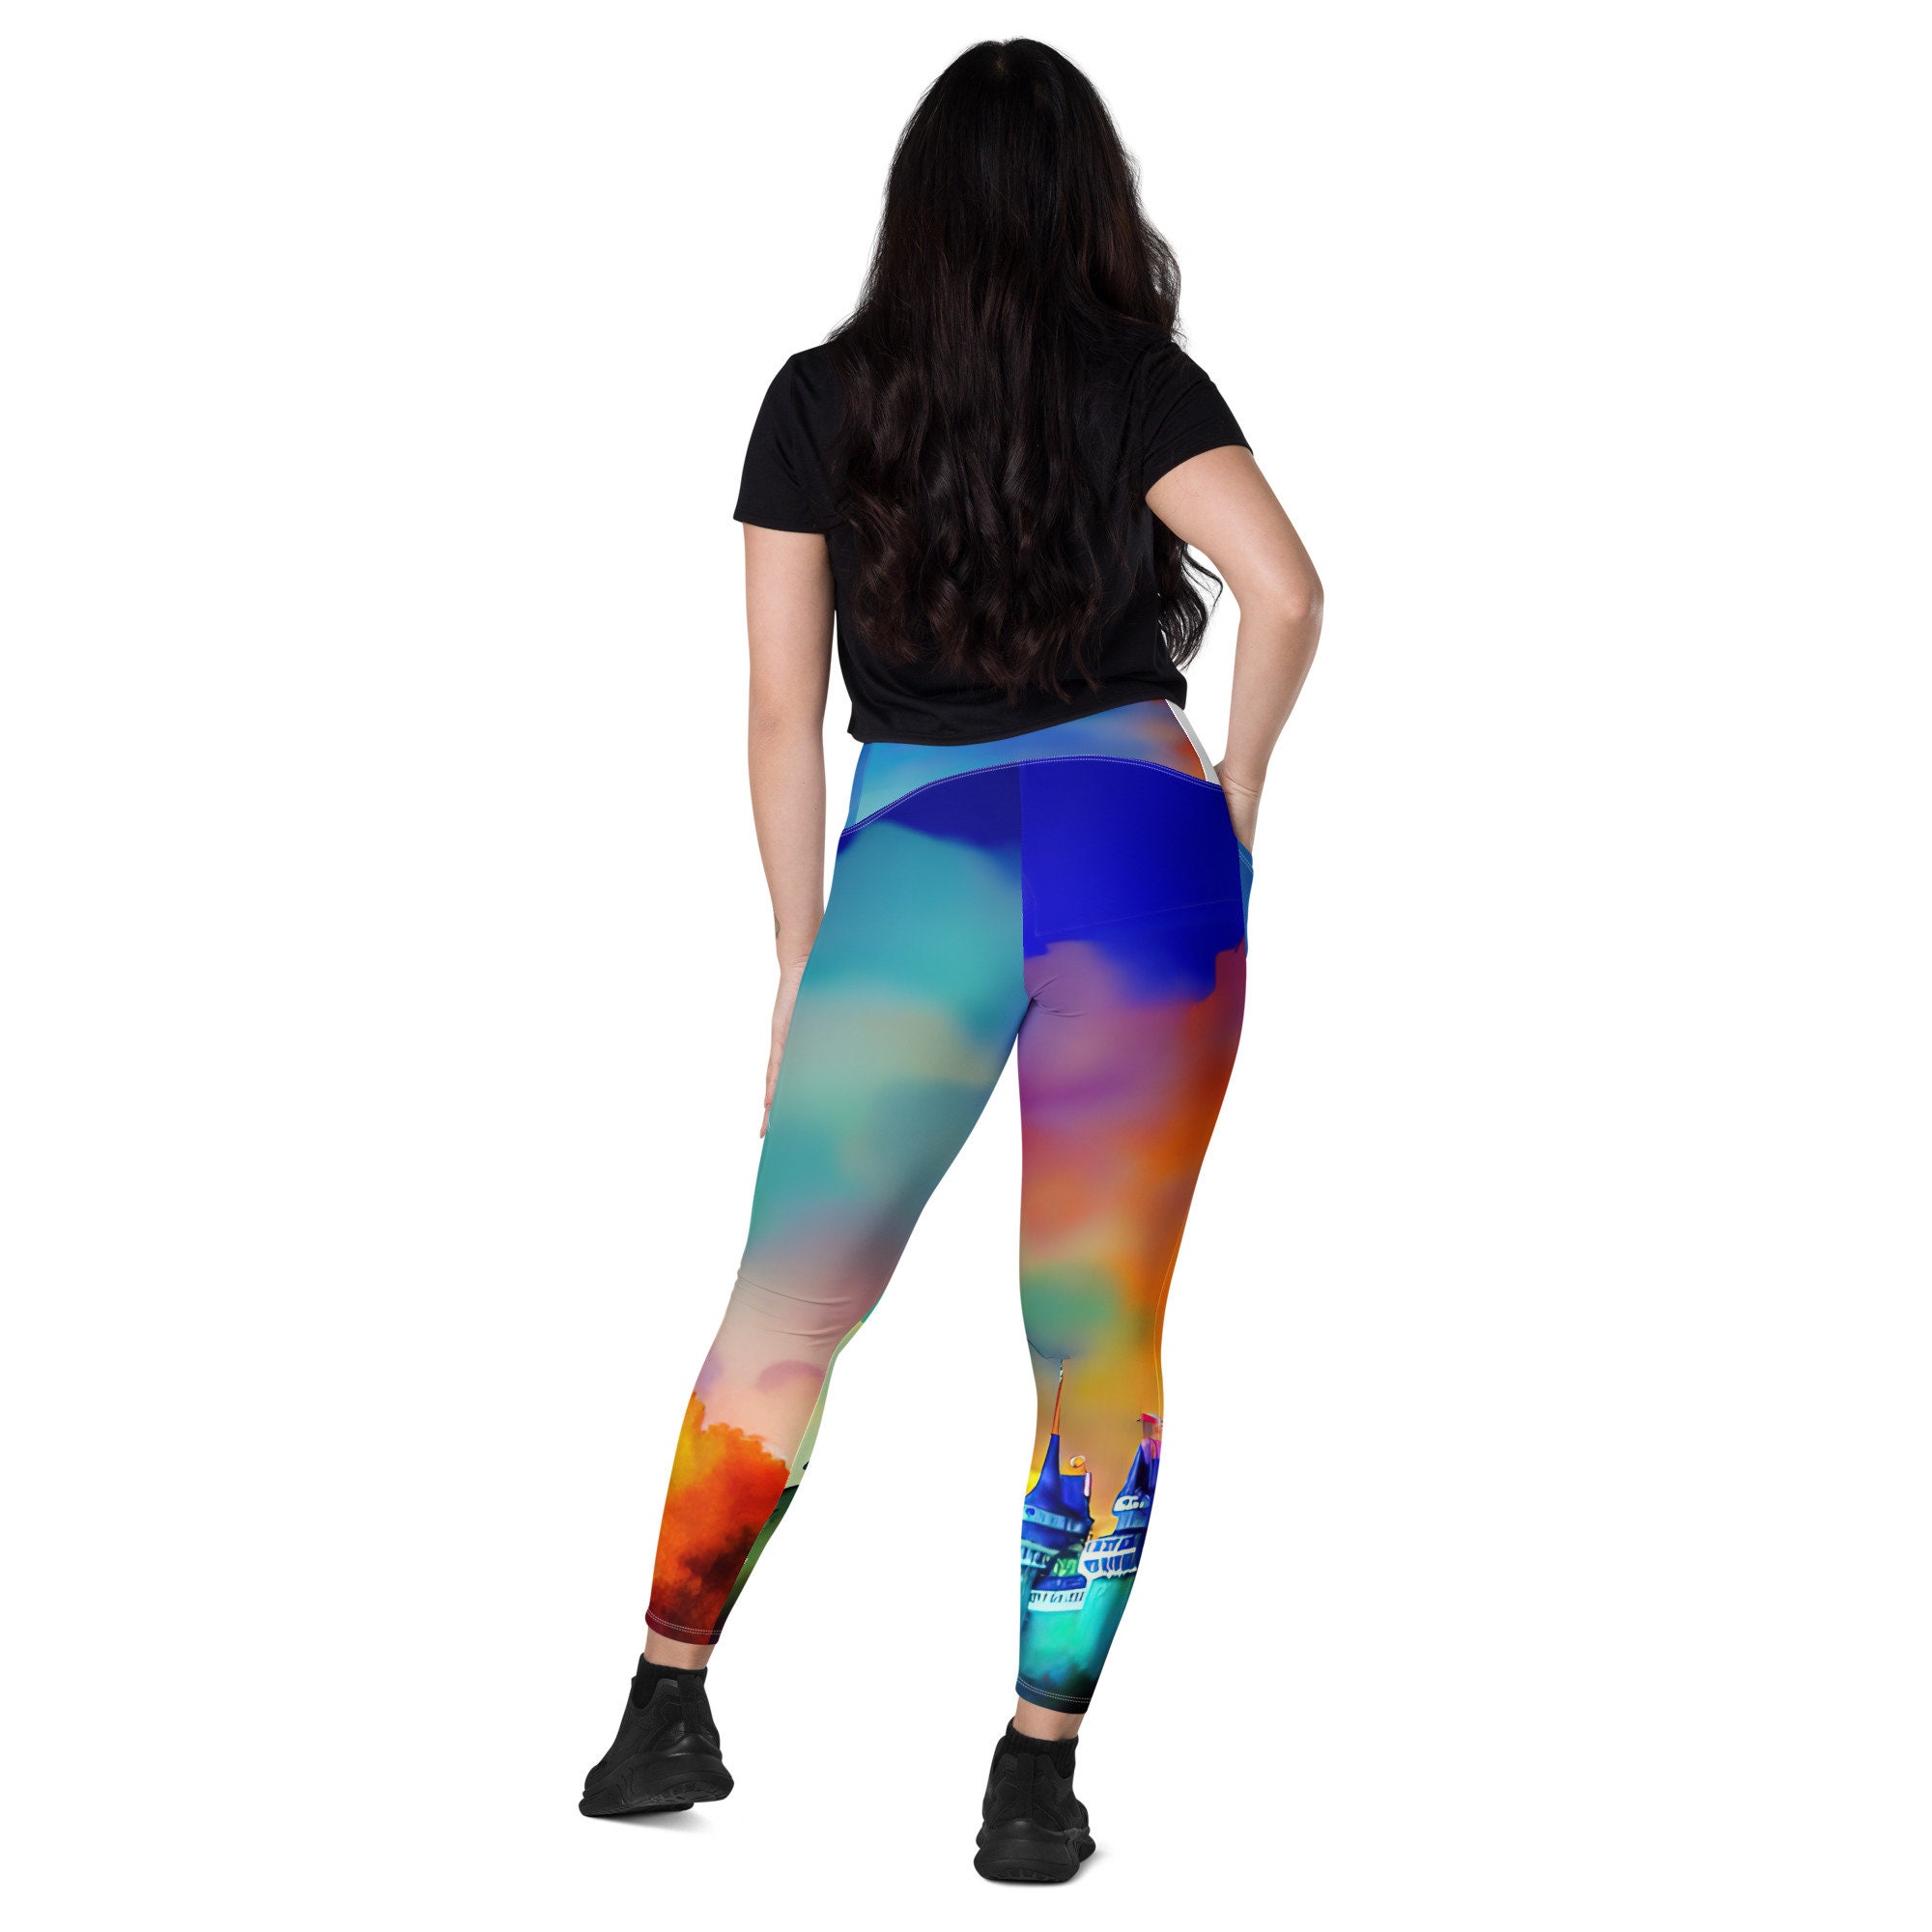 Watercolor Cinde's Castle Leggings - Gift for woman